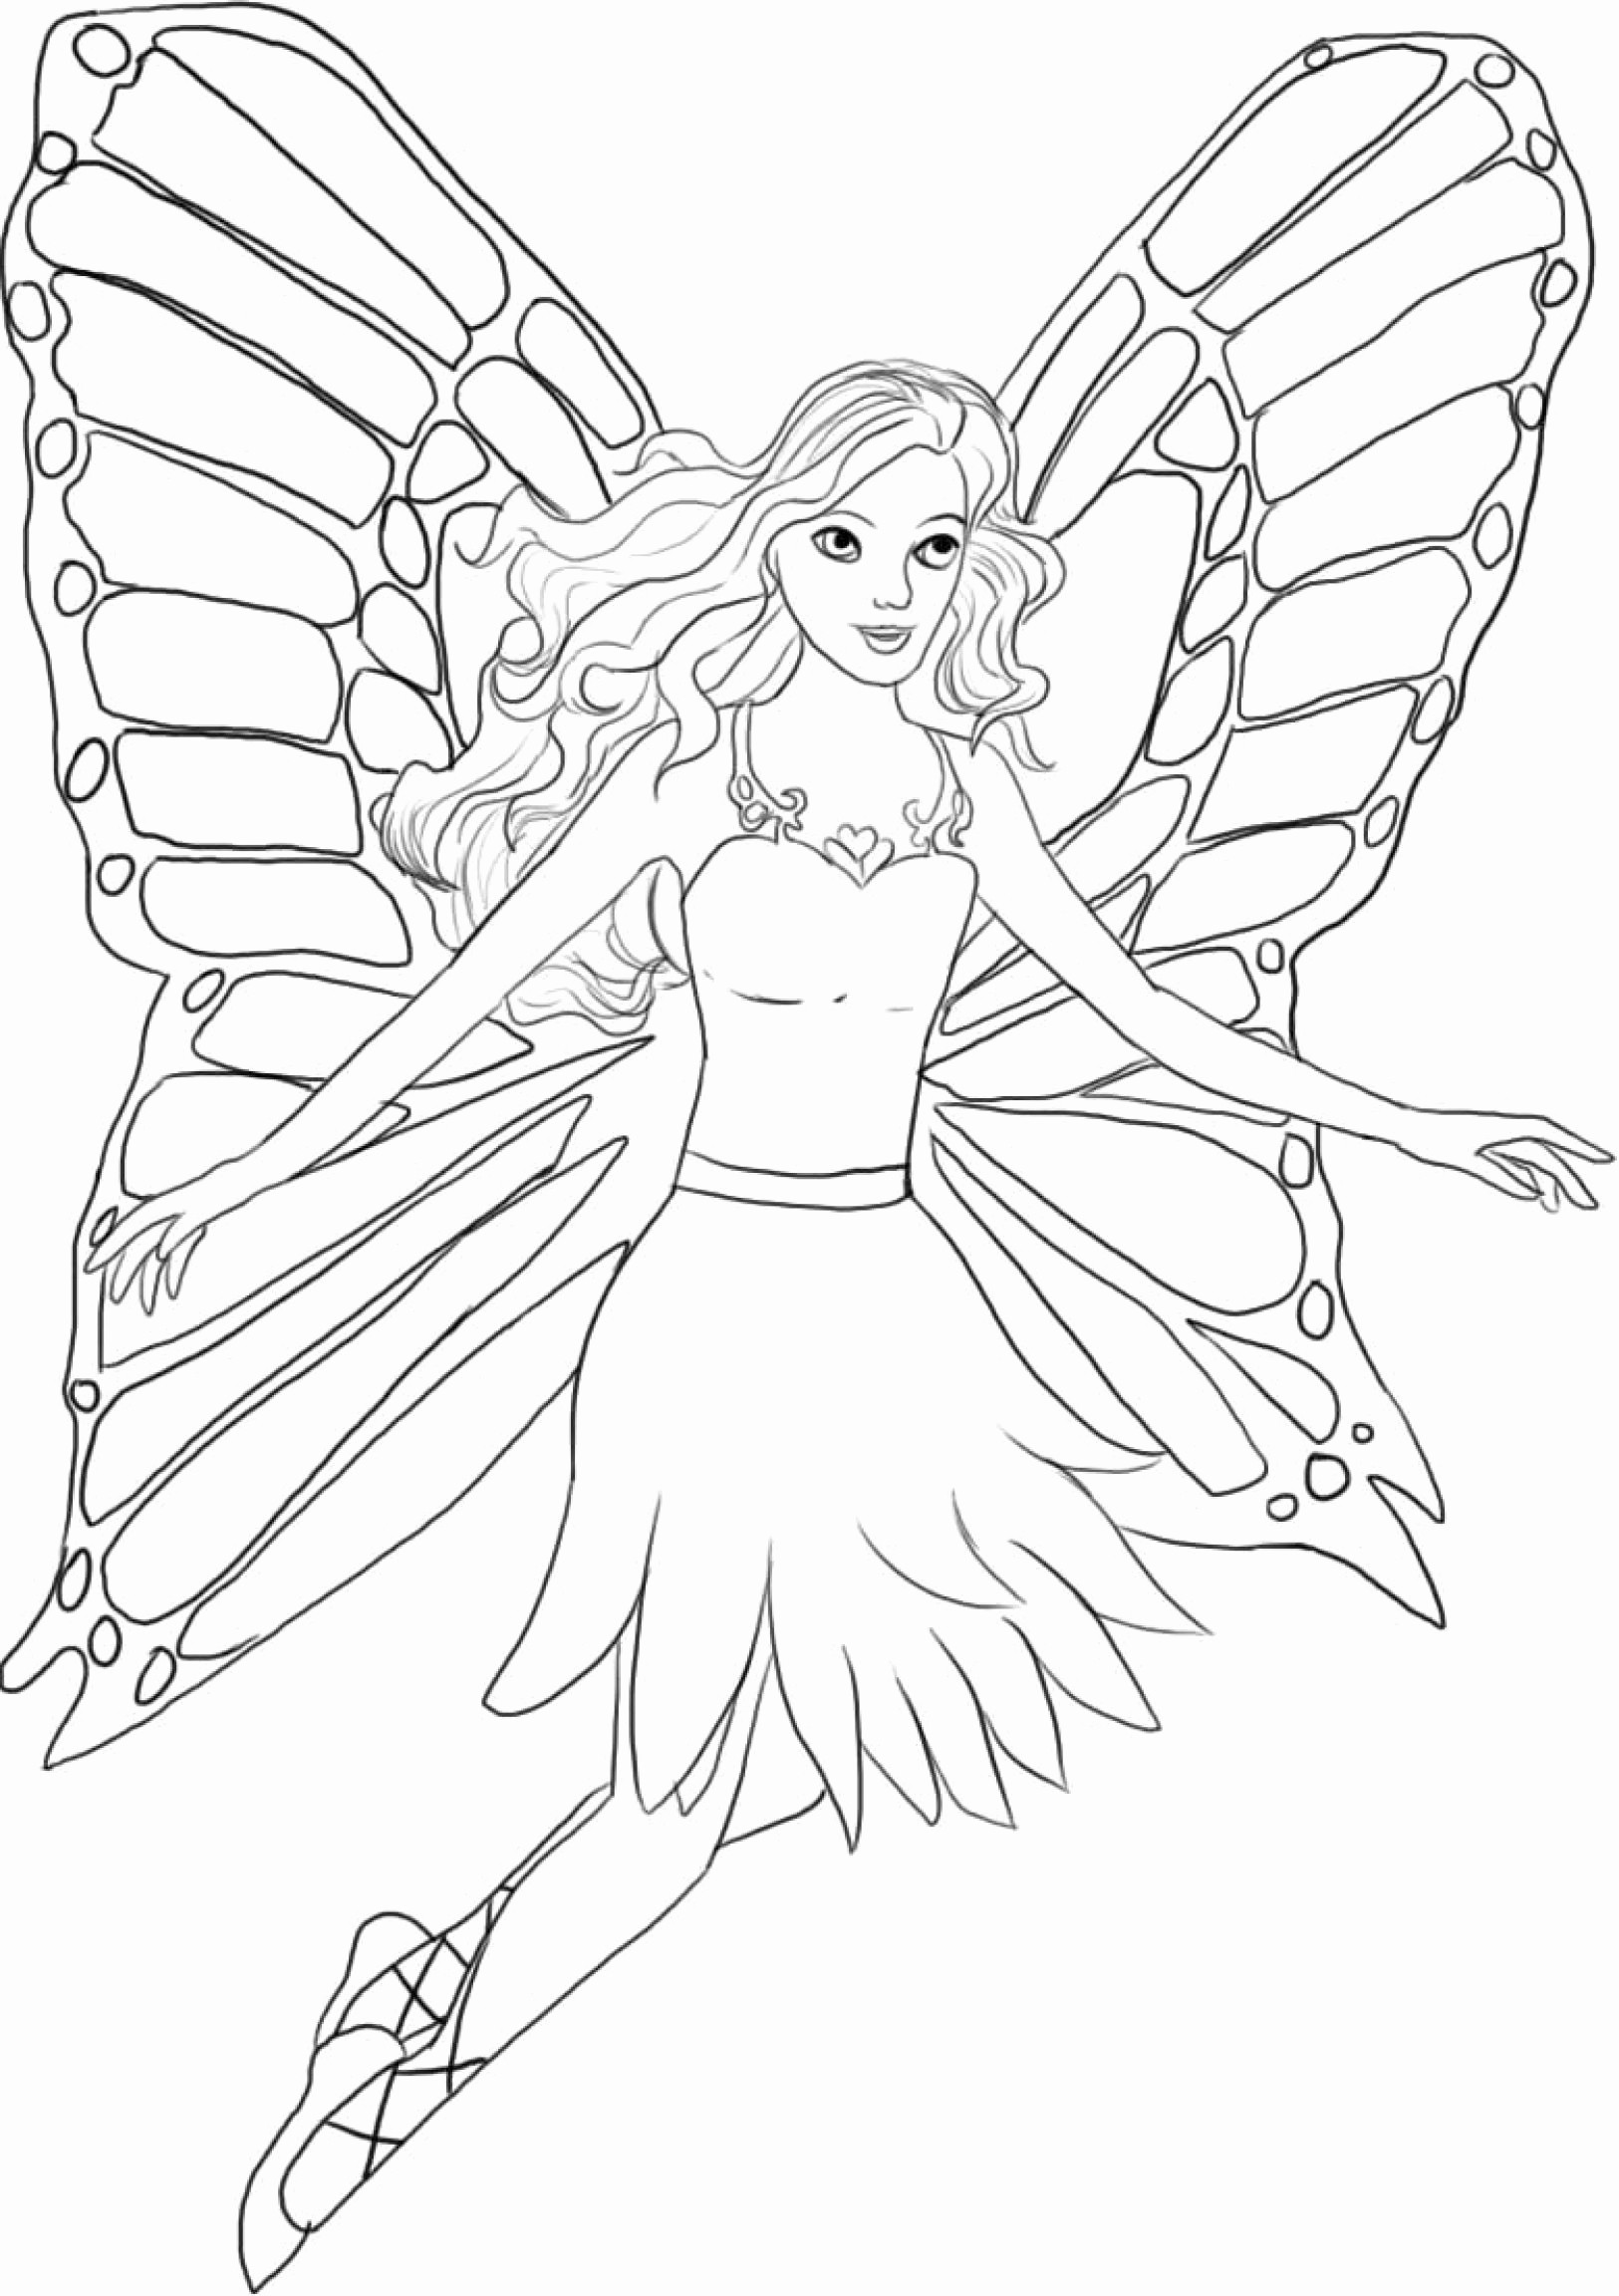 Fairy Princess Coloring Pages Wallpaper